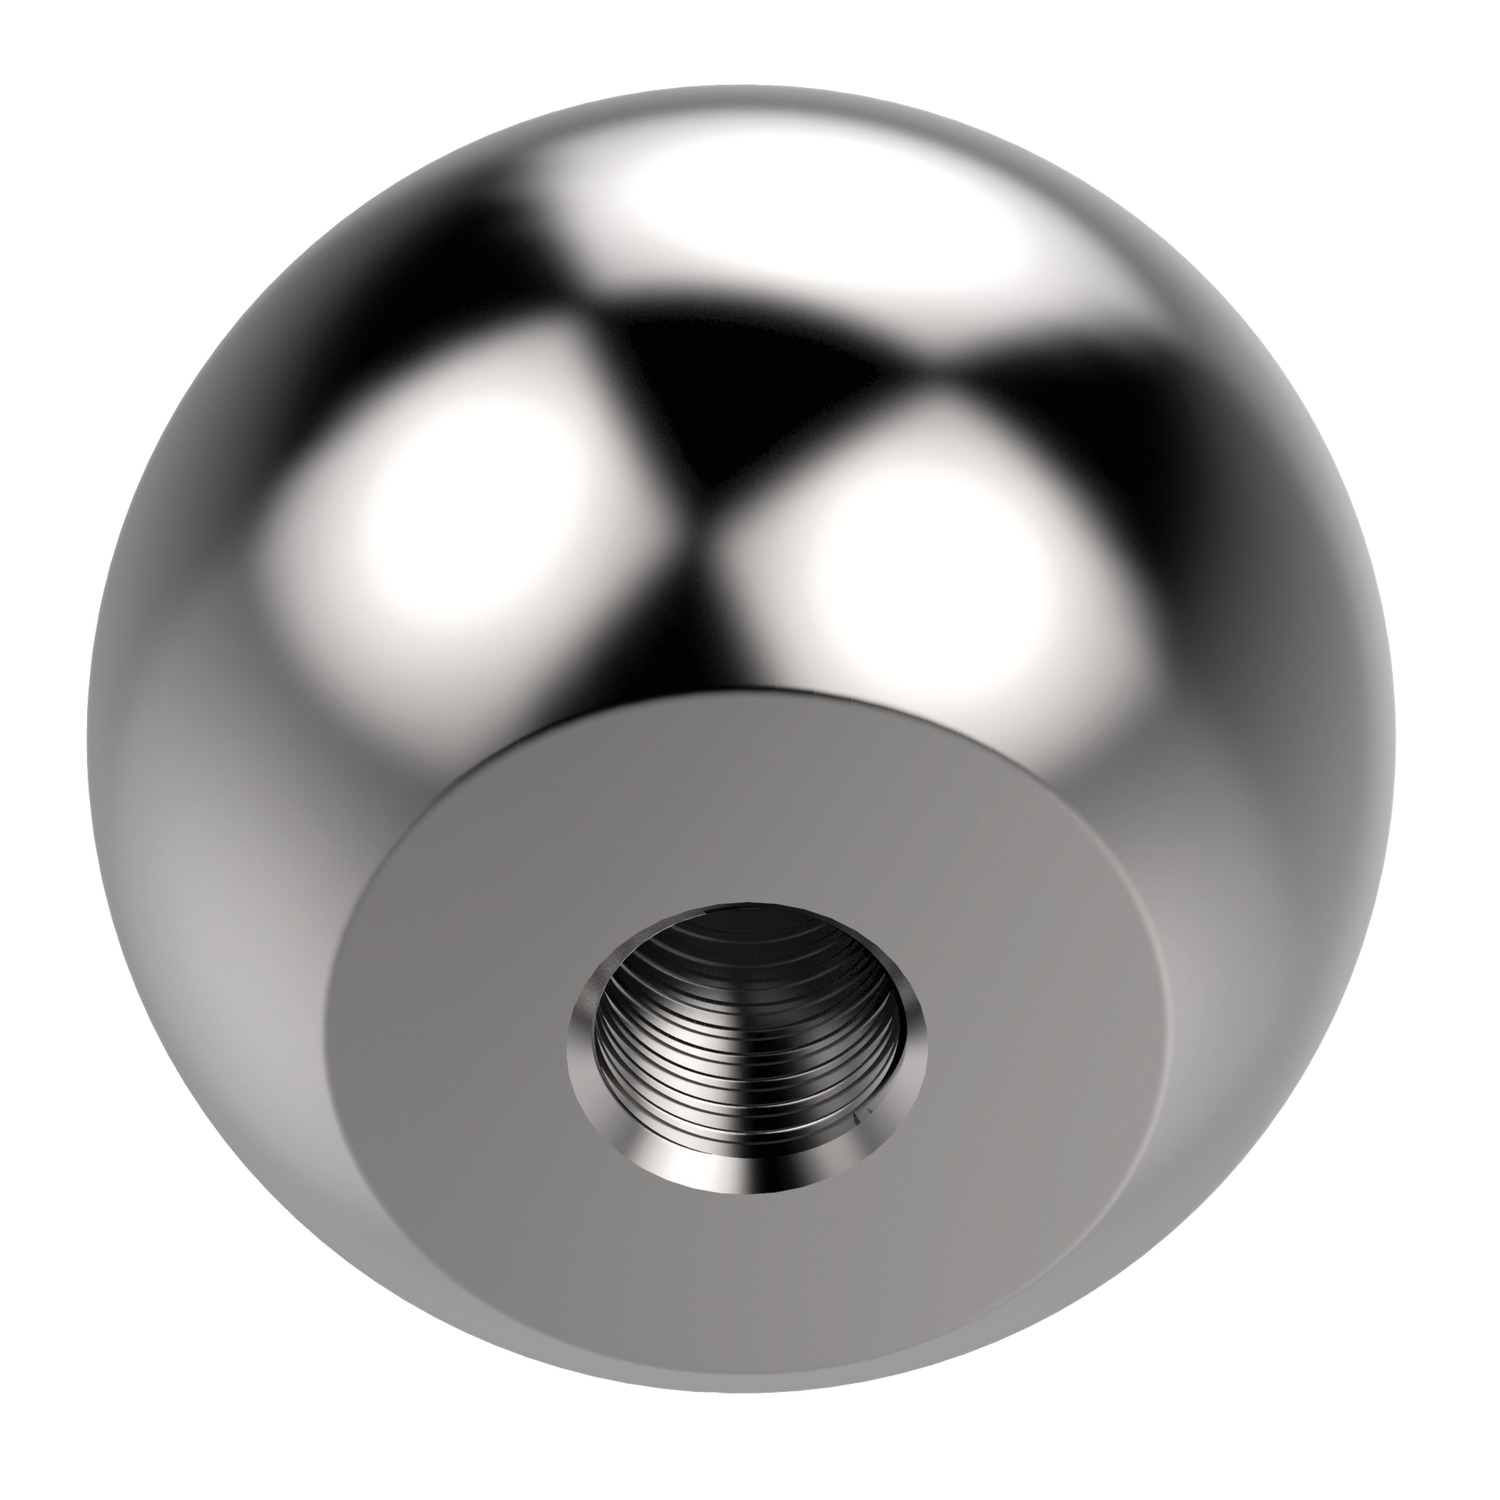 Product 73002, Ball Knobs - Steel similar to DIN 319 / 